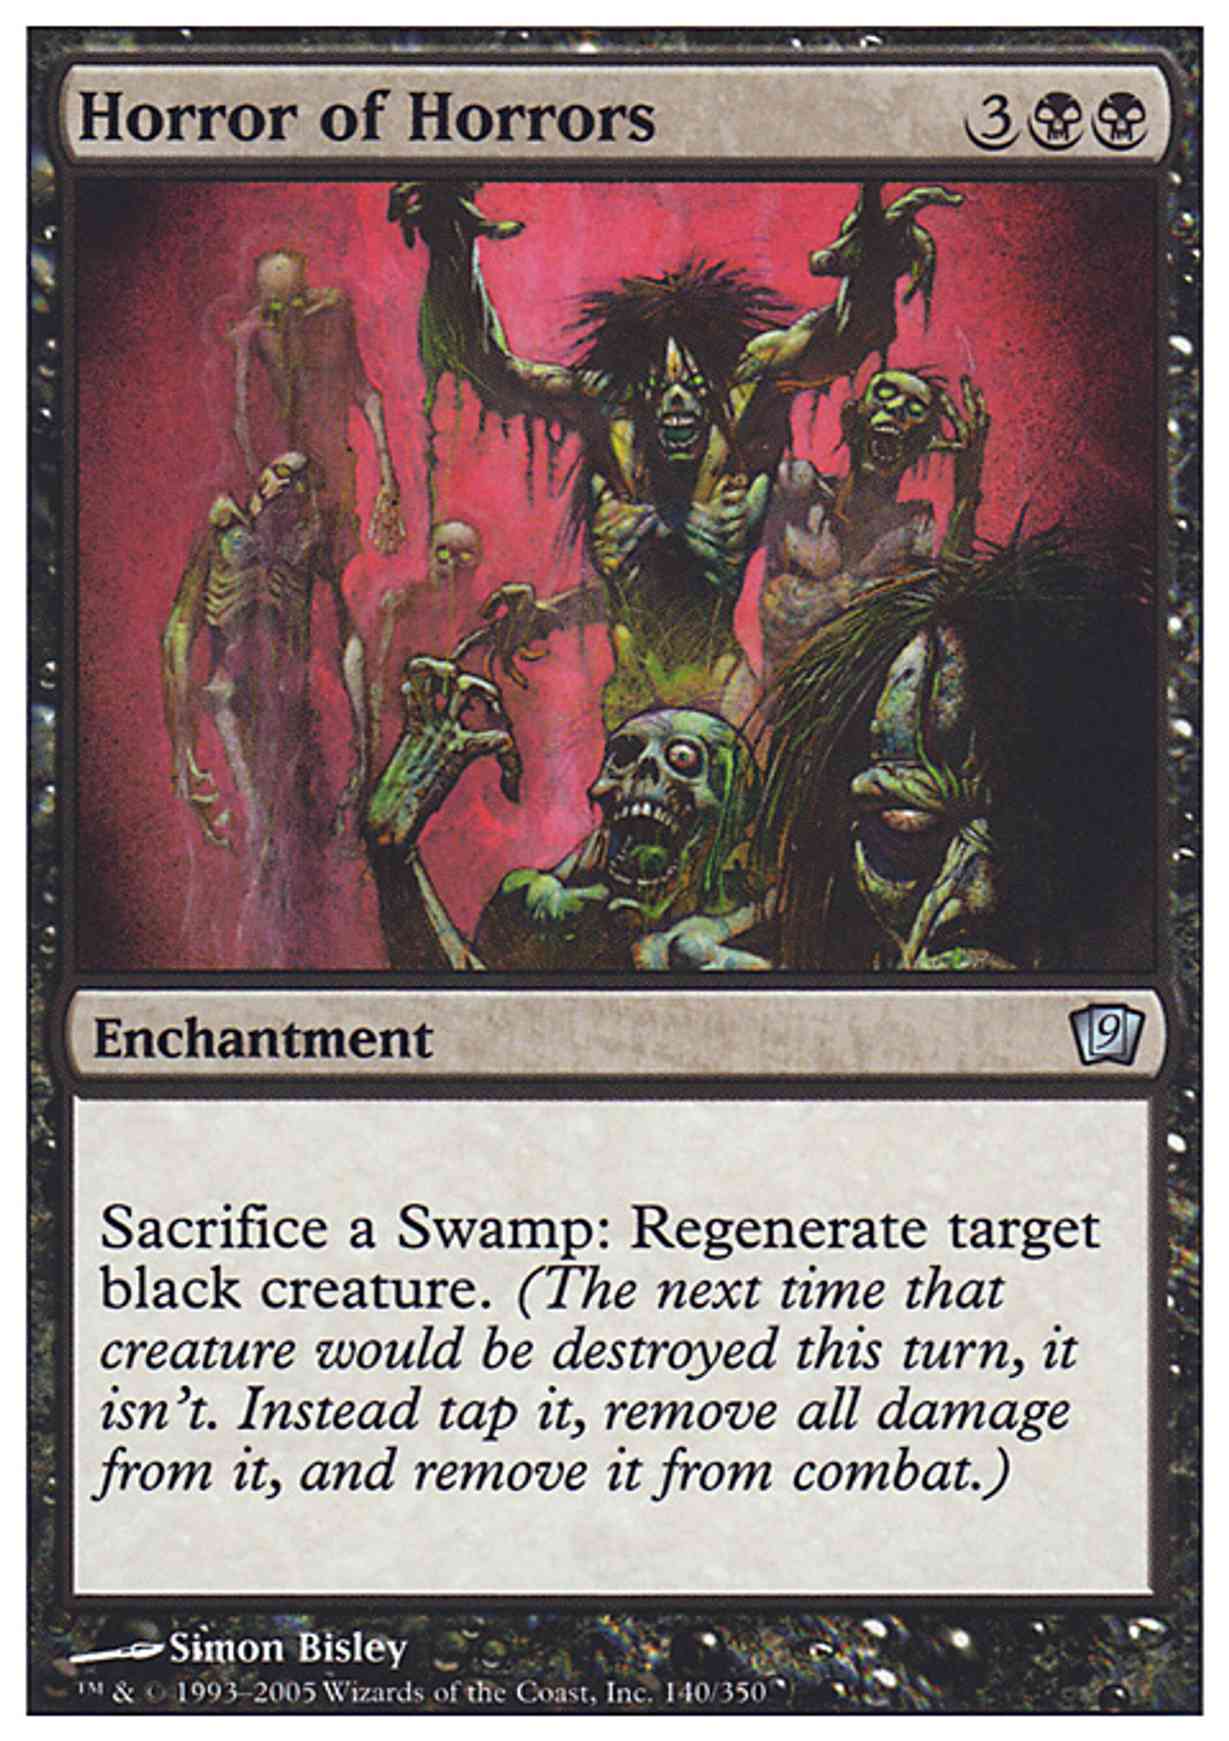 Horror of Horrors magic card front